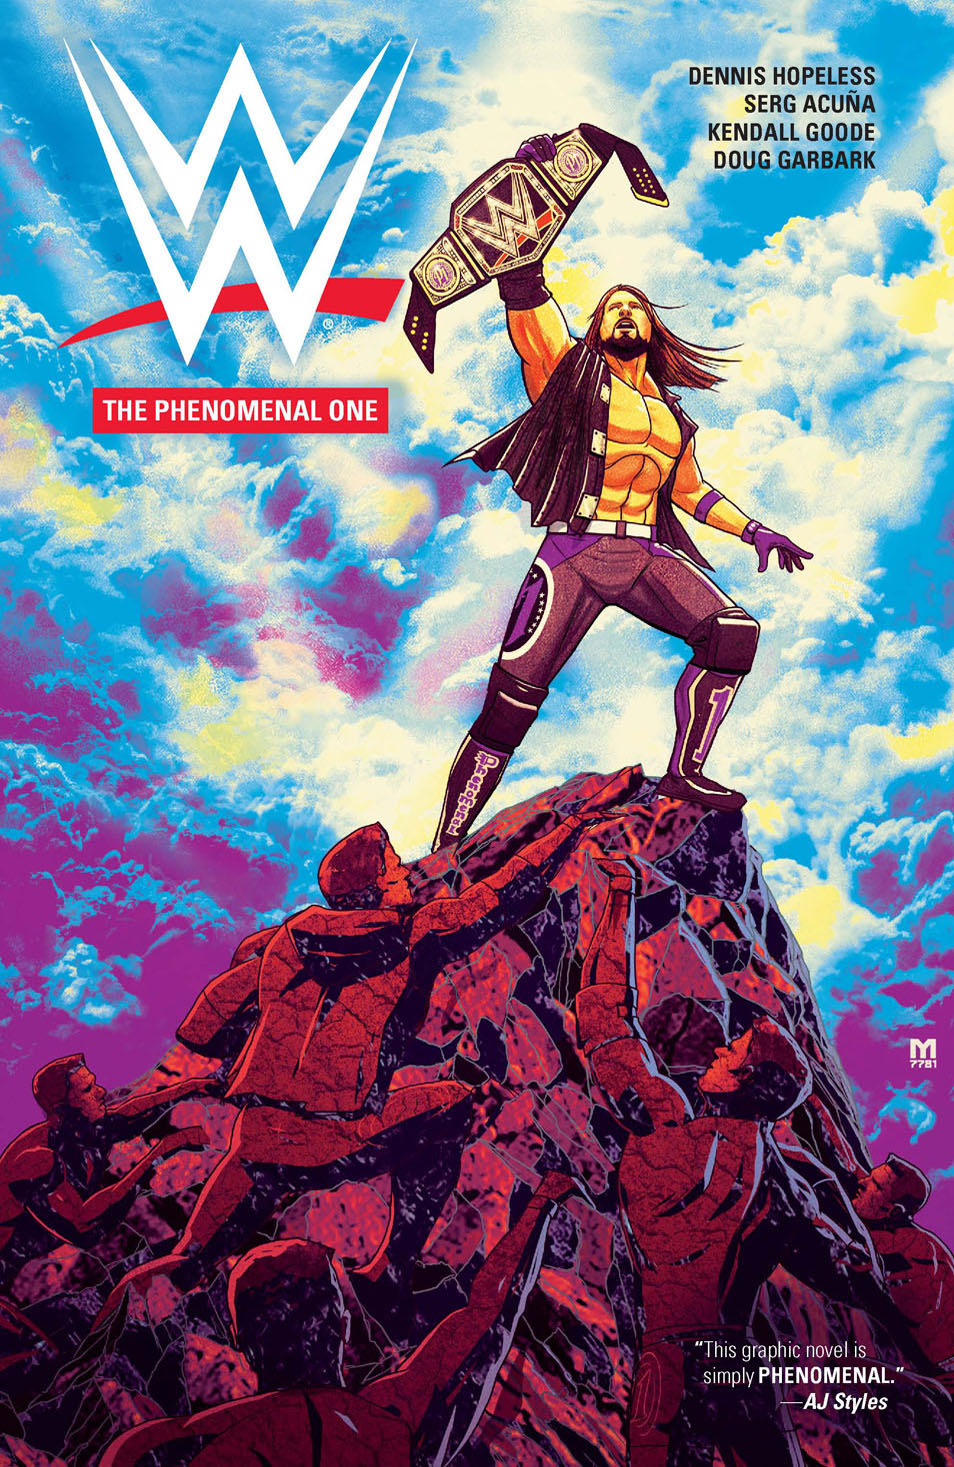 This image is the cover for the book WWE: The Phenomenal One, WWE